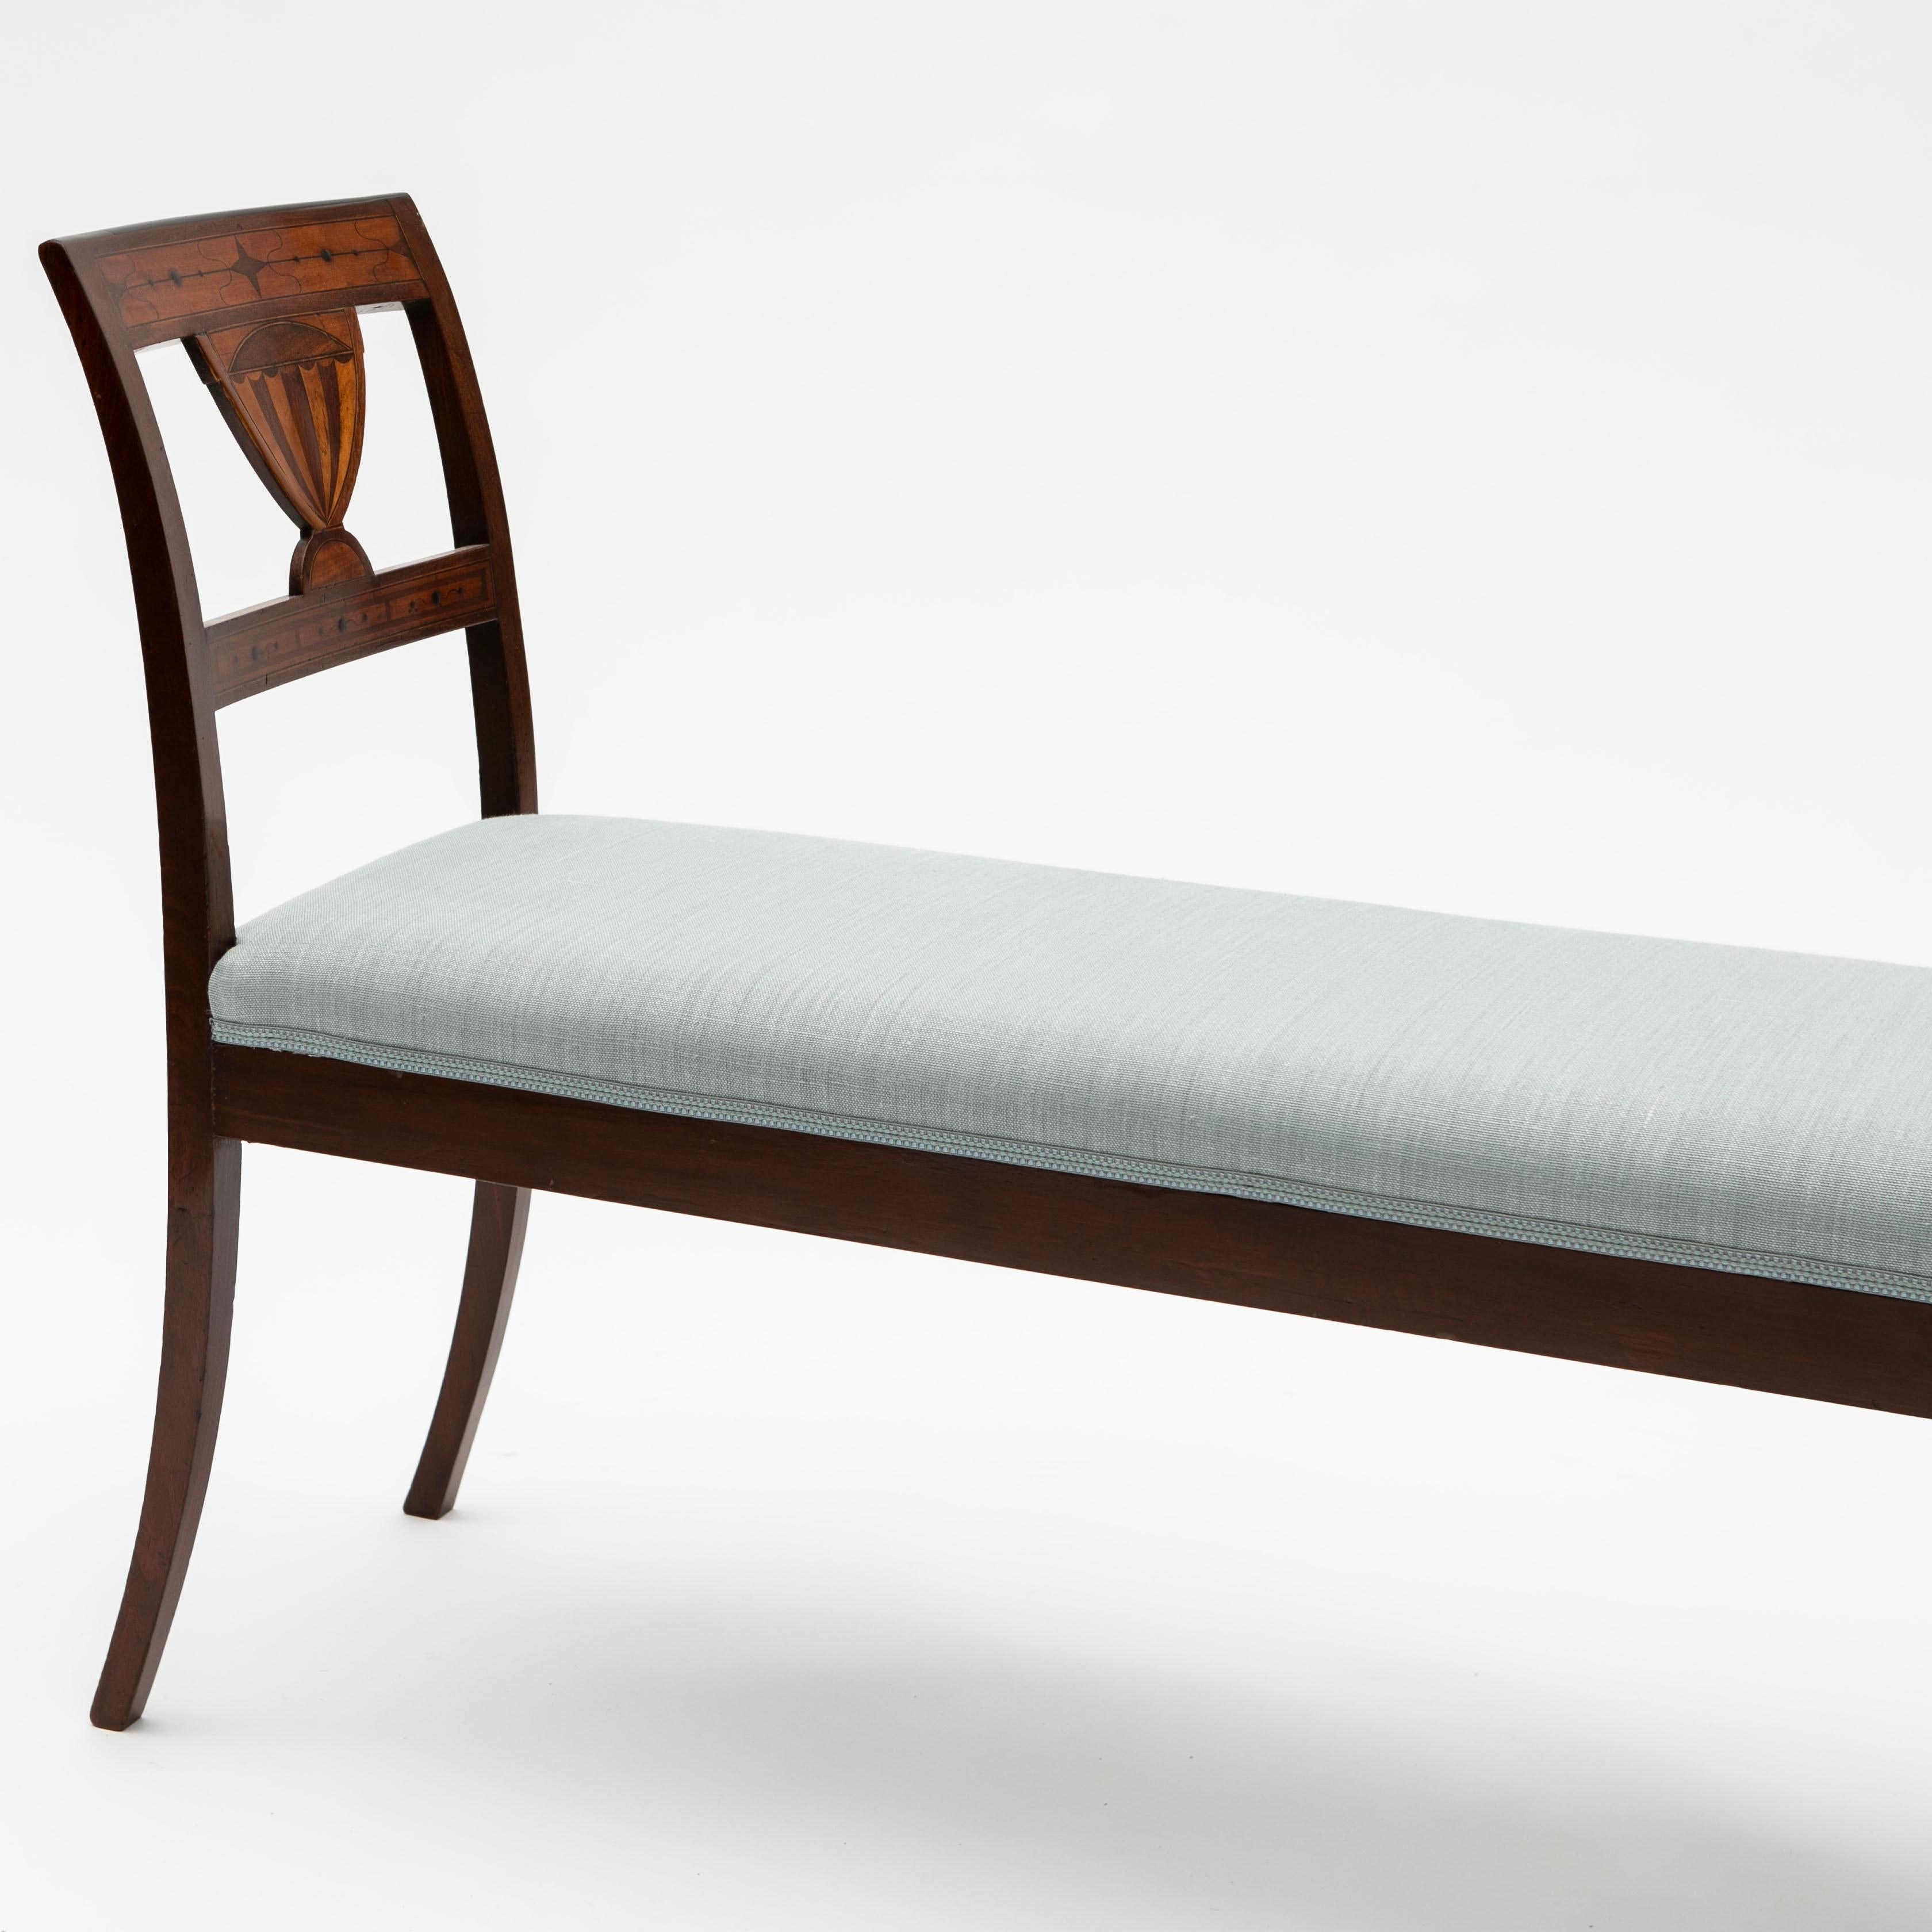 Danish Early 19th Century Upholstered Seat Bench For Sale 1